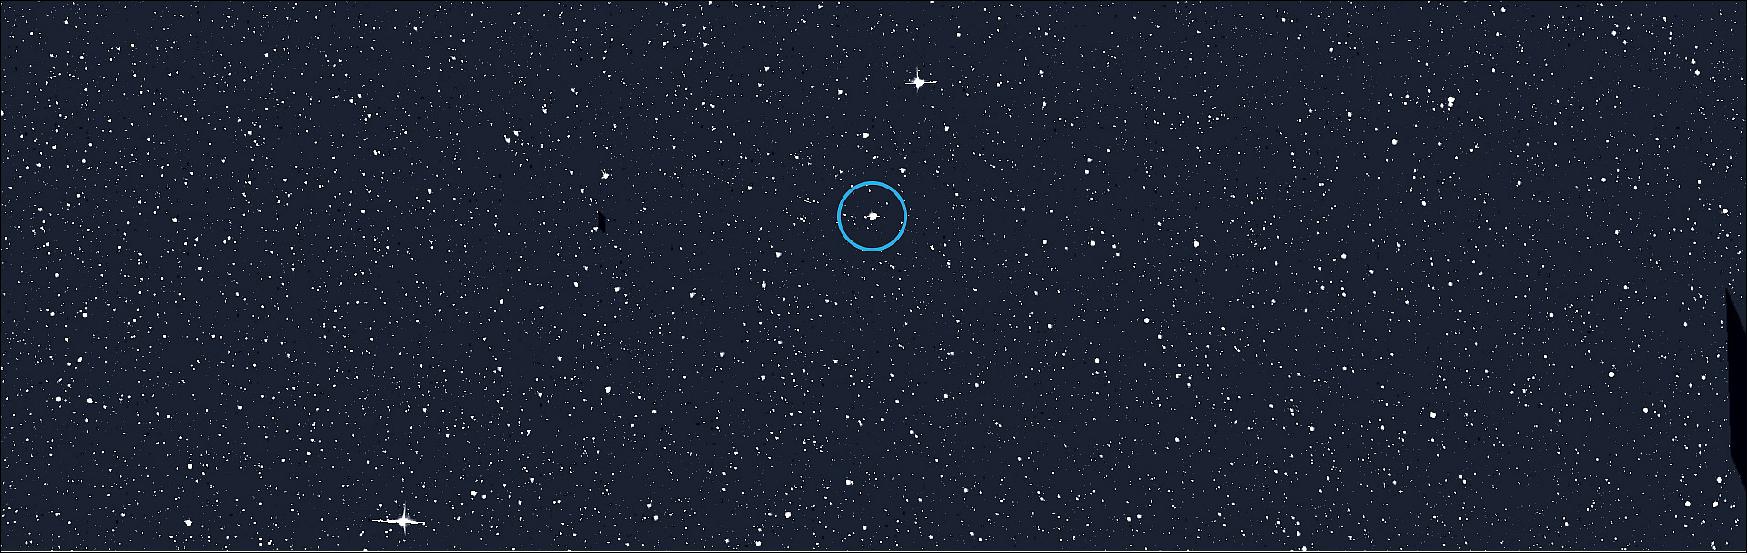 Figure 43: The star Alpha Draconis (circled), also known as Thuban, has long been known to be a binary system. Now data from NASA's TESS show its two stars undergo mutual eclipses (image credit: NASA/MIT/TESS)